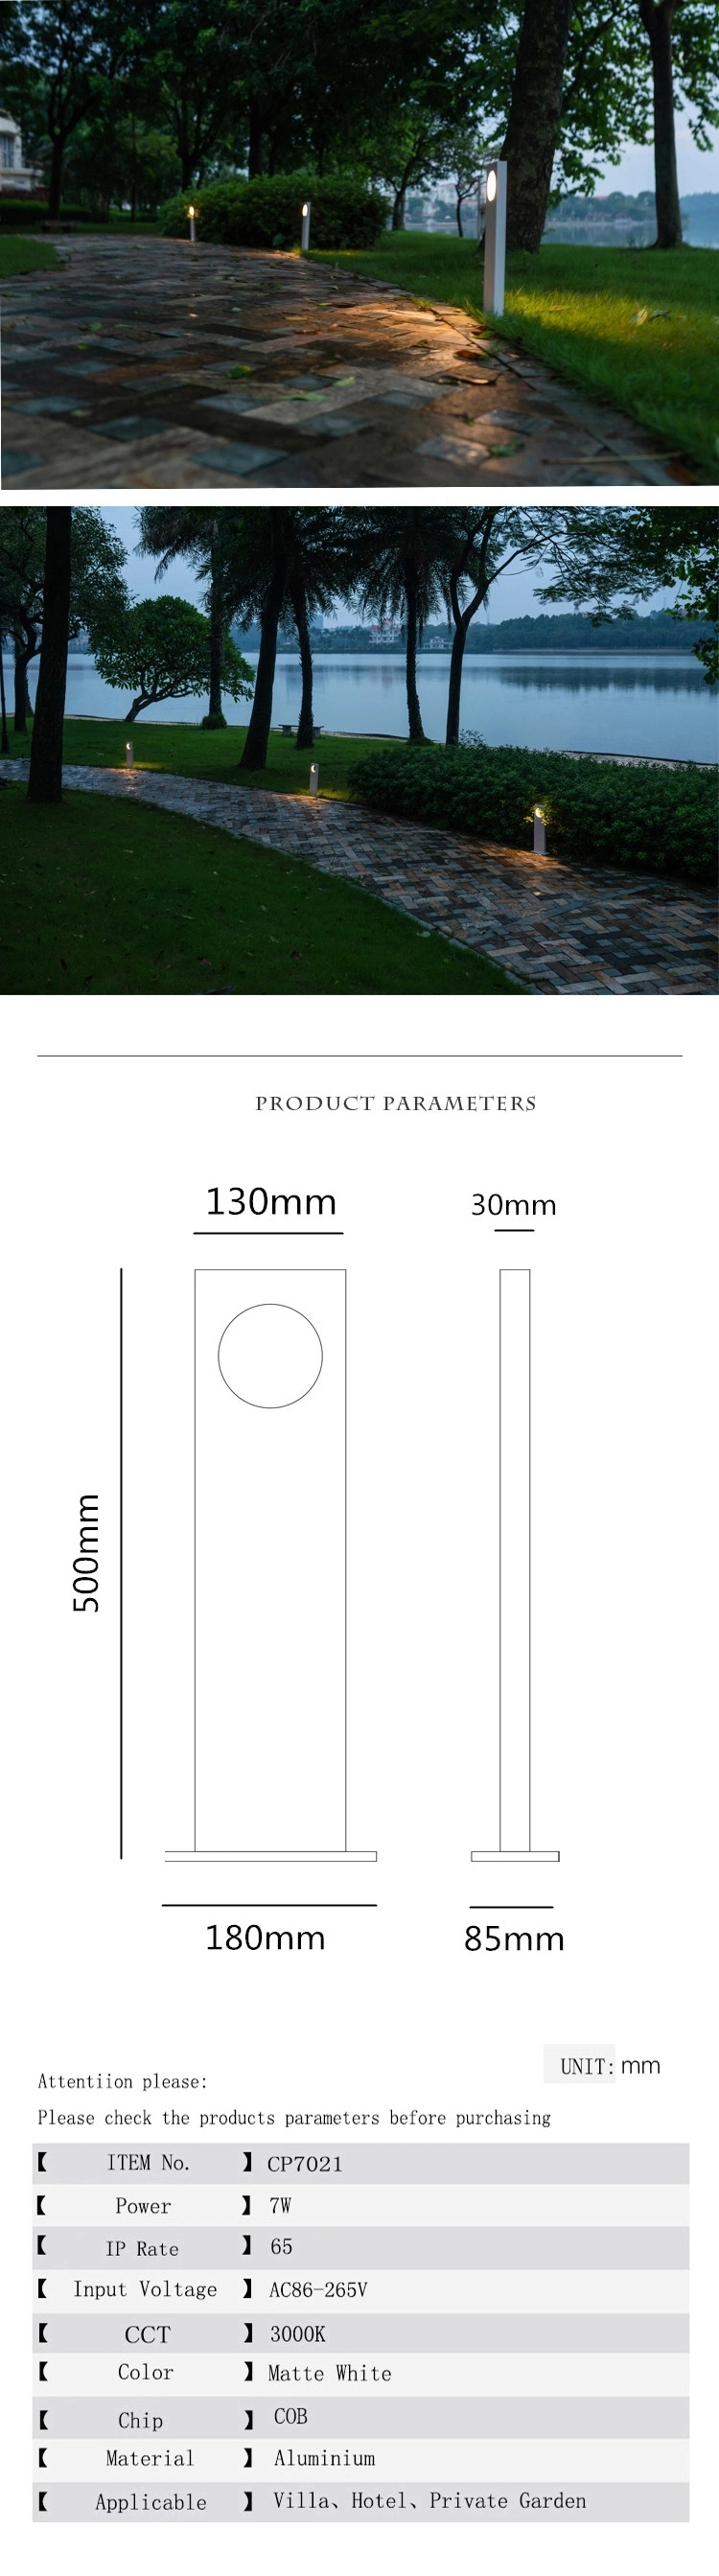 Wall Fence Outside Patio 42FT 5W Green for 220 Yiwu Standing LED Square Nairobi Light Solar Lights Outdoor Waterproof New Classic Garden Lighting Japan